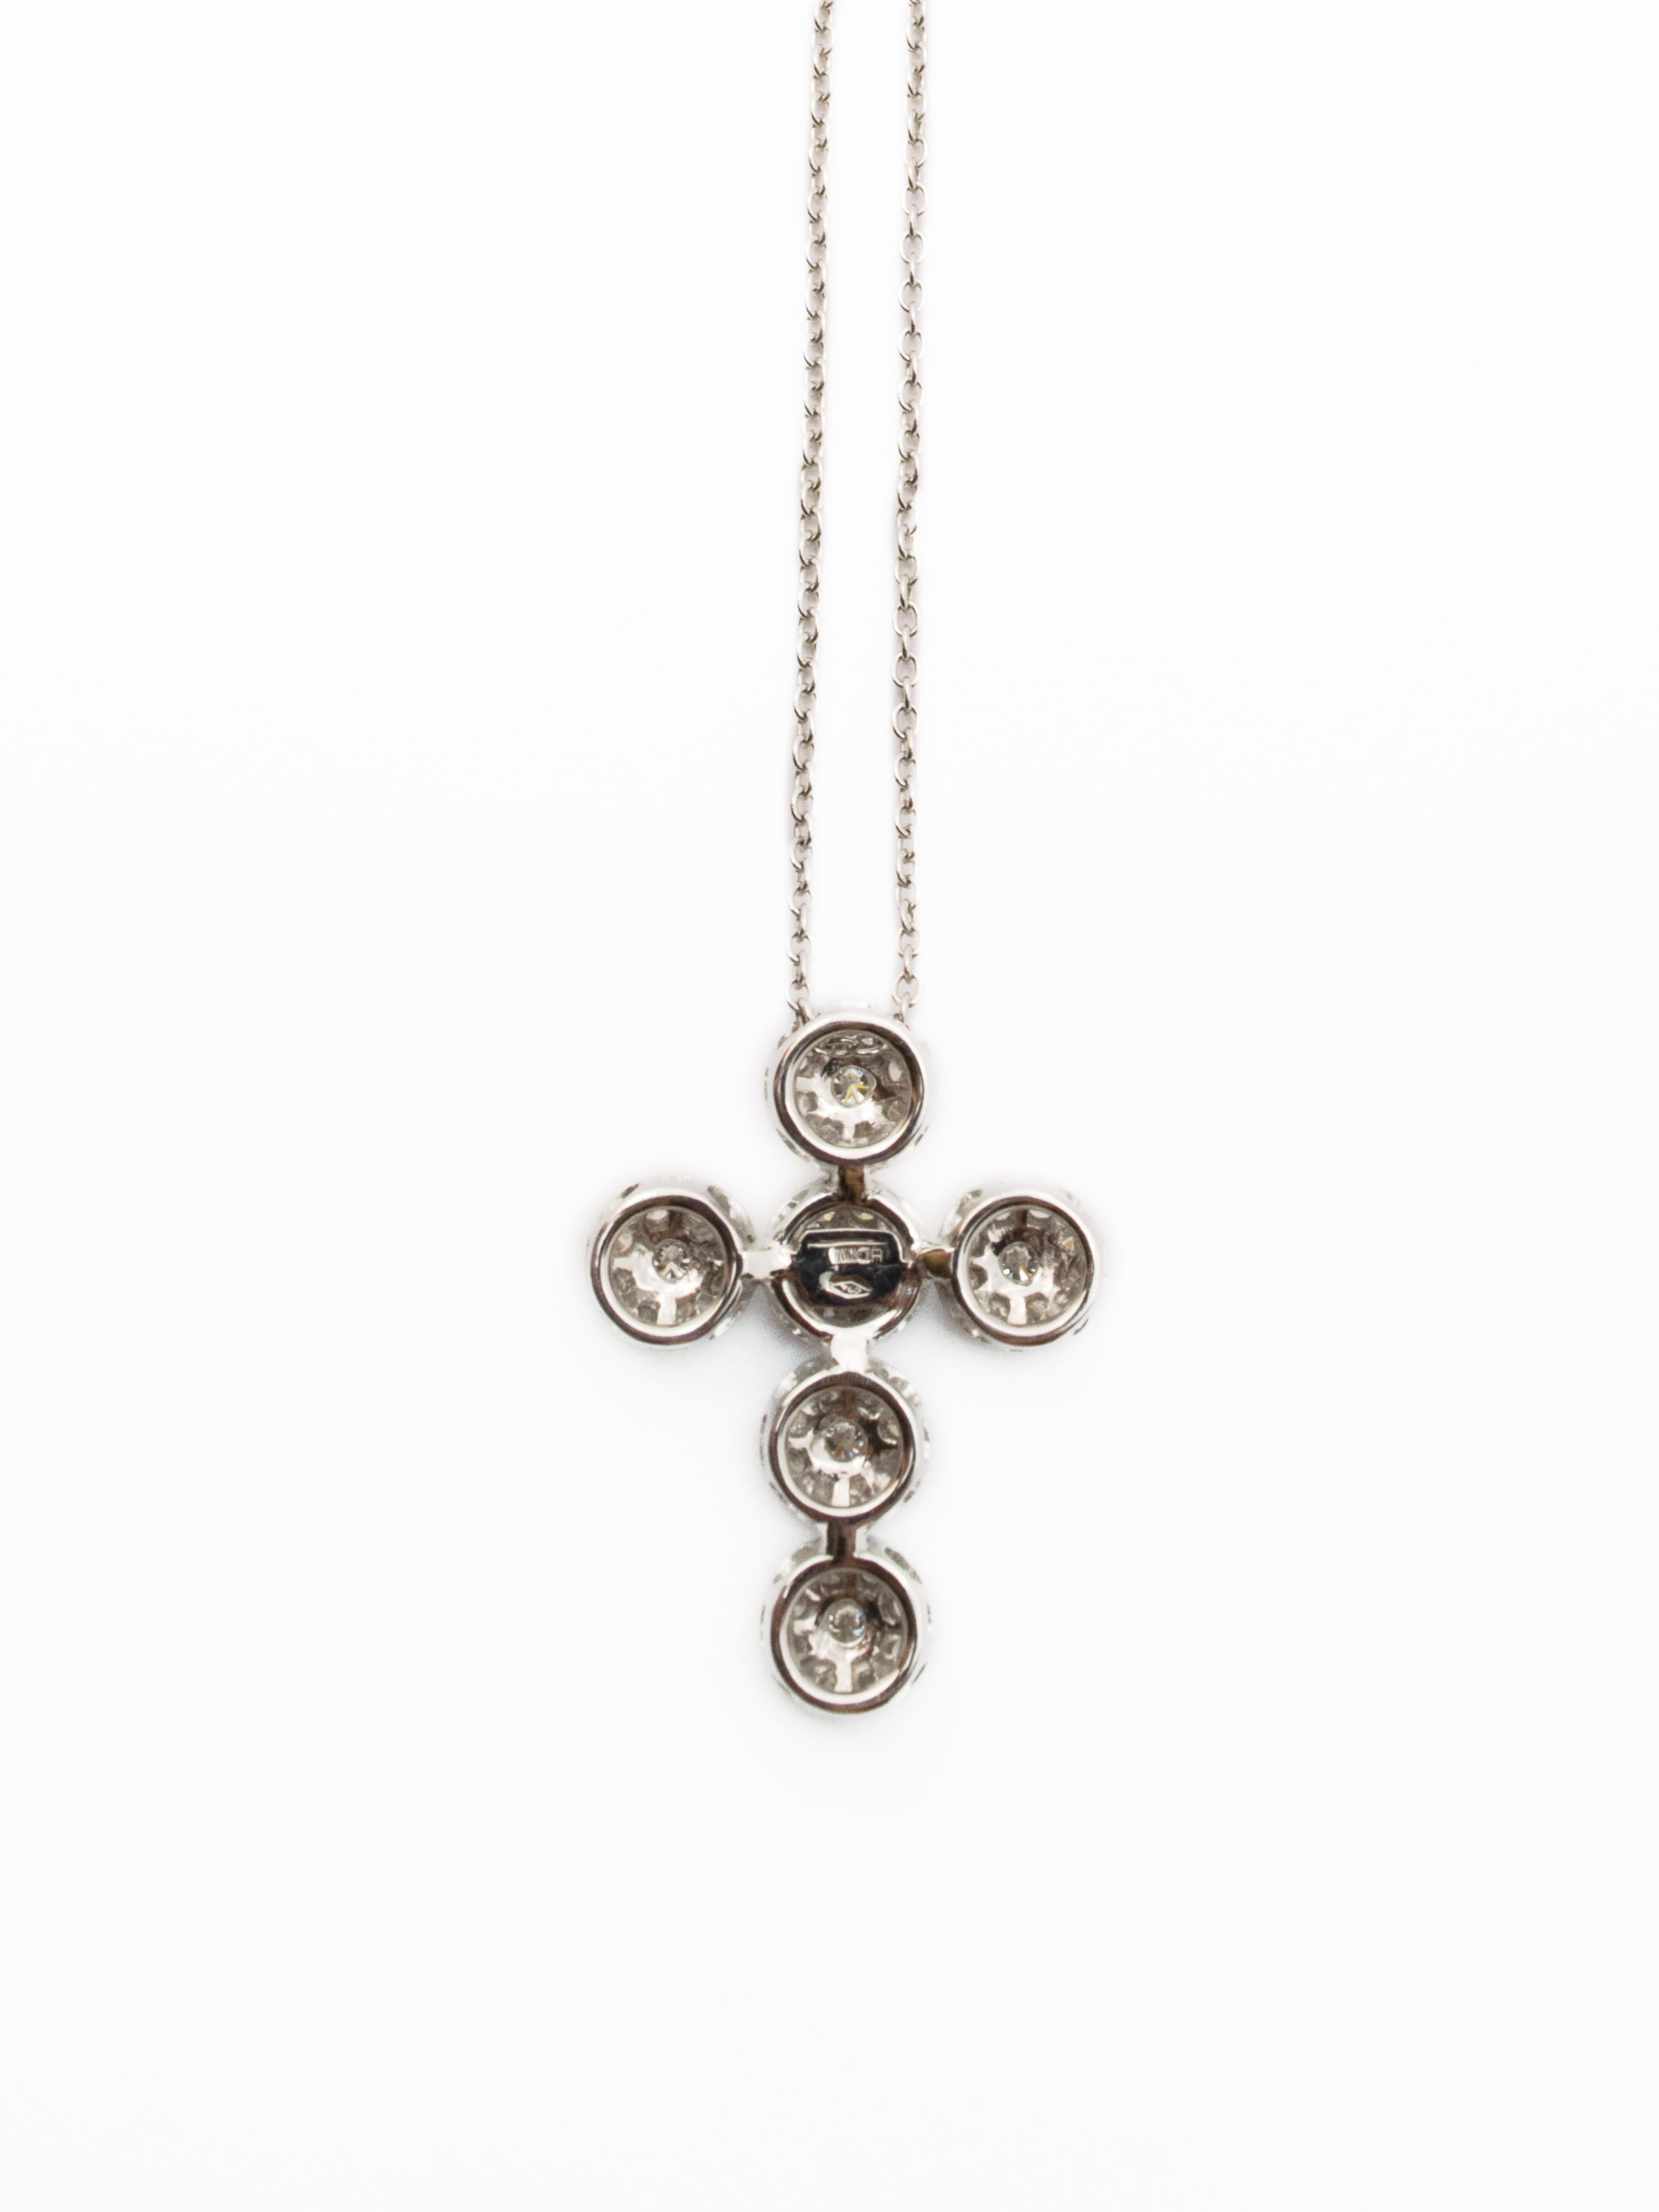 A beautiful cross pendant with chain loop.
This jewelry is made of 18 kt white gold and has a total weight of 8.25 grams.
The cross consists of six bezels  of diamonds, each of which has a larger size diamond in the center.
The total weight of the